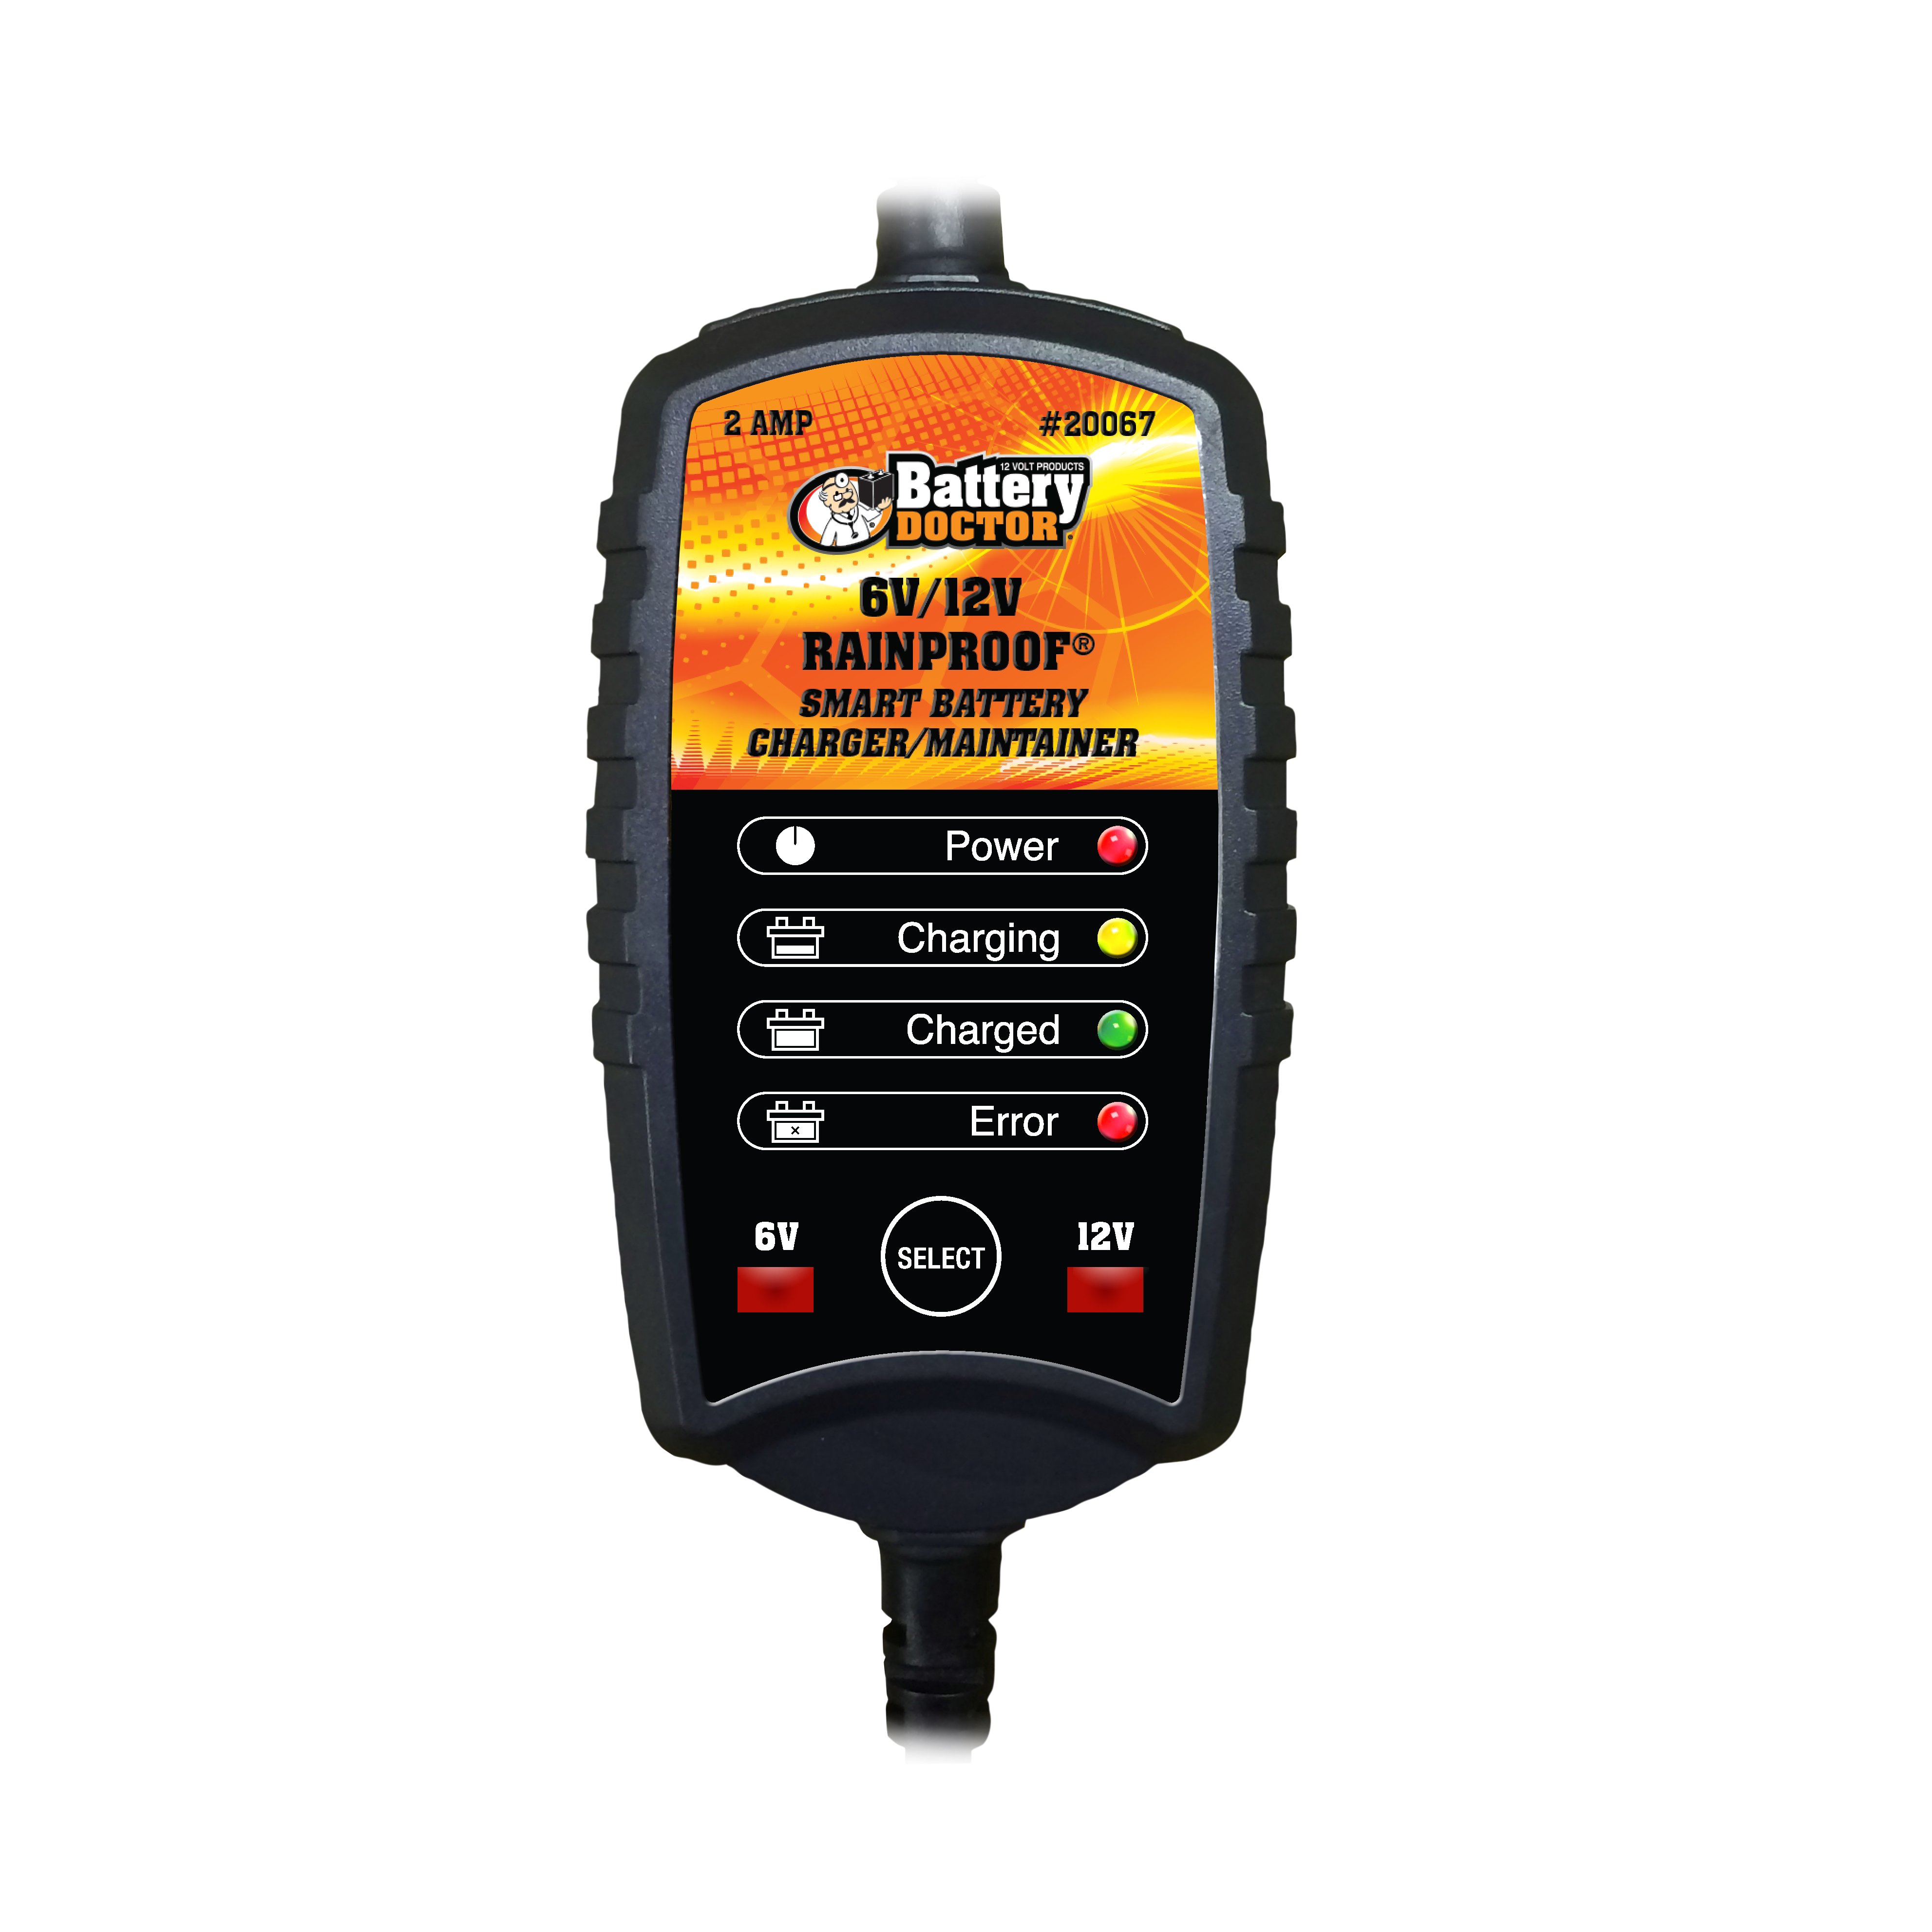 Battery Doctor Rainproof Battery Charger - 20067